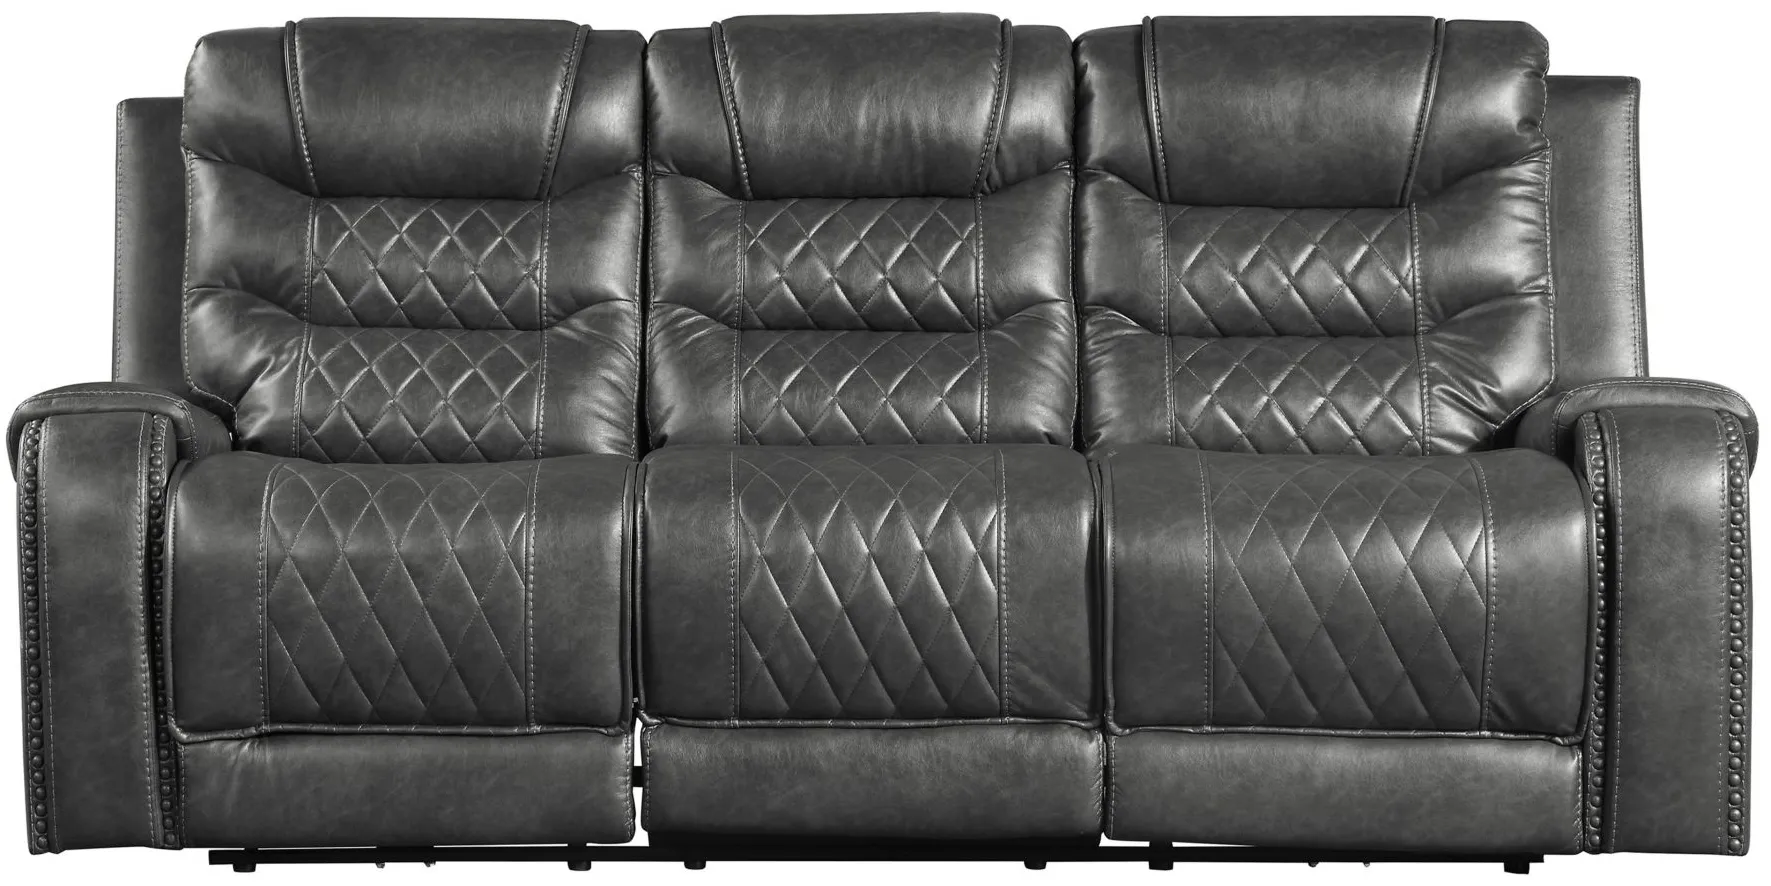 Greenway Double Reclining Sofa w/ Cup Holders and USB Port in Gray by Homelegance